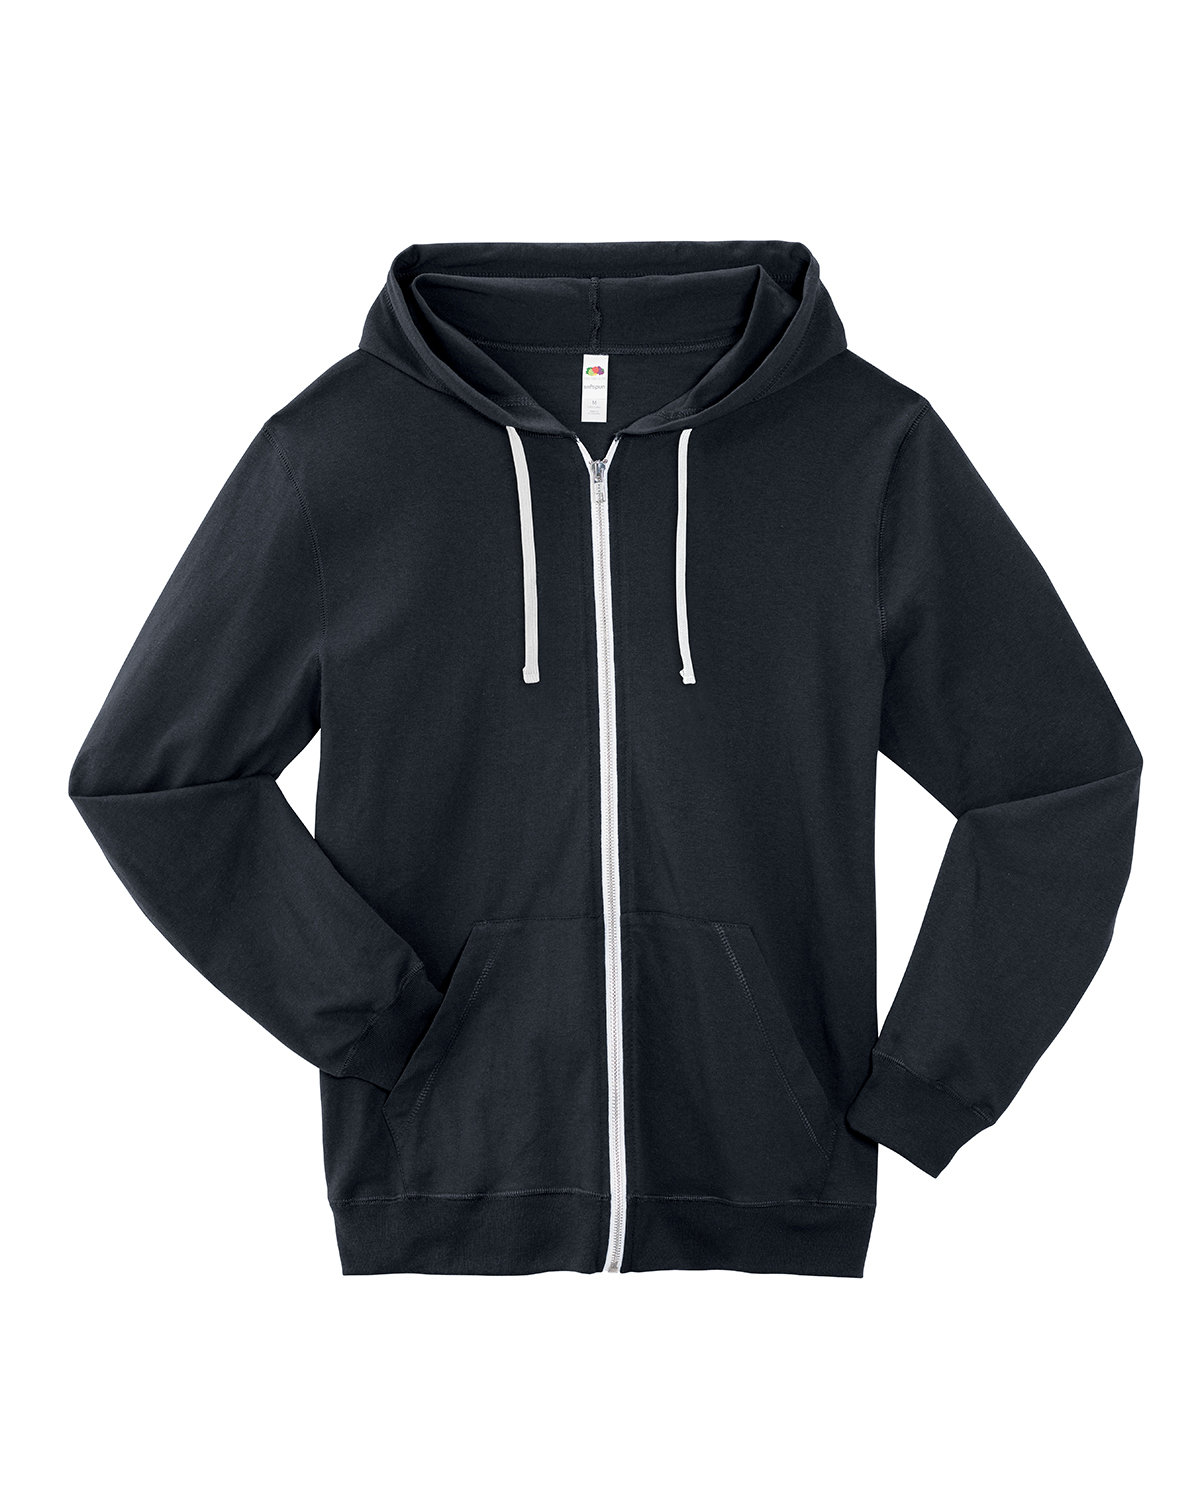 Picture of Fruit of the Loom Sofspun® Jersey Full-Zip Hooded Sweatshirt